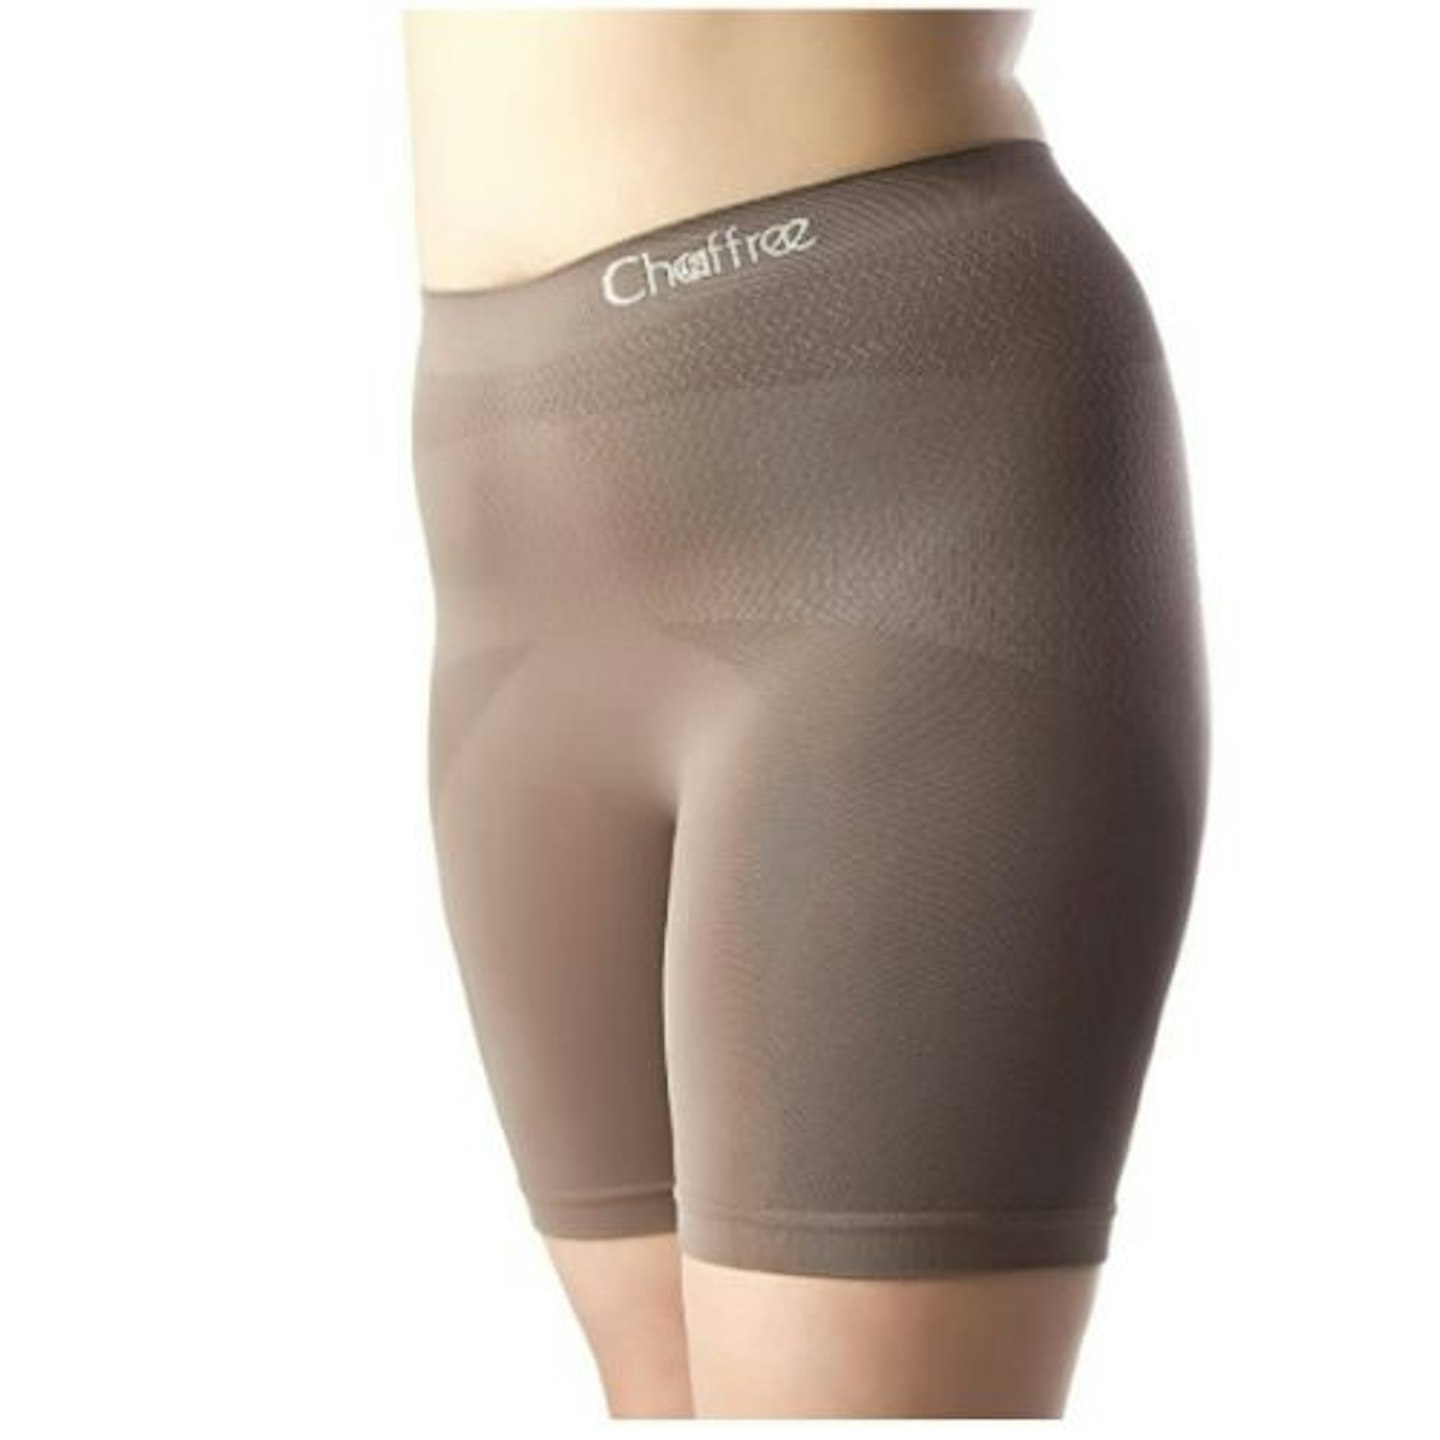 Review: Chaffree Anti-Chafing Underwear  The Lingerie Addict - Everything  To Know About Lingerie